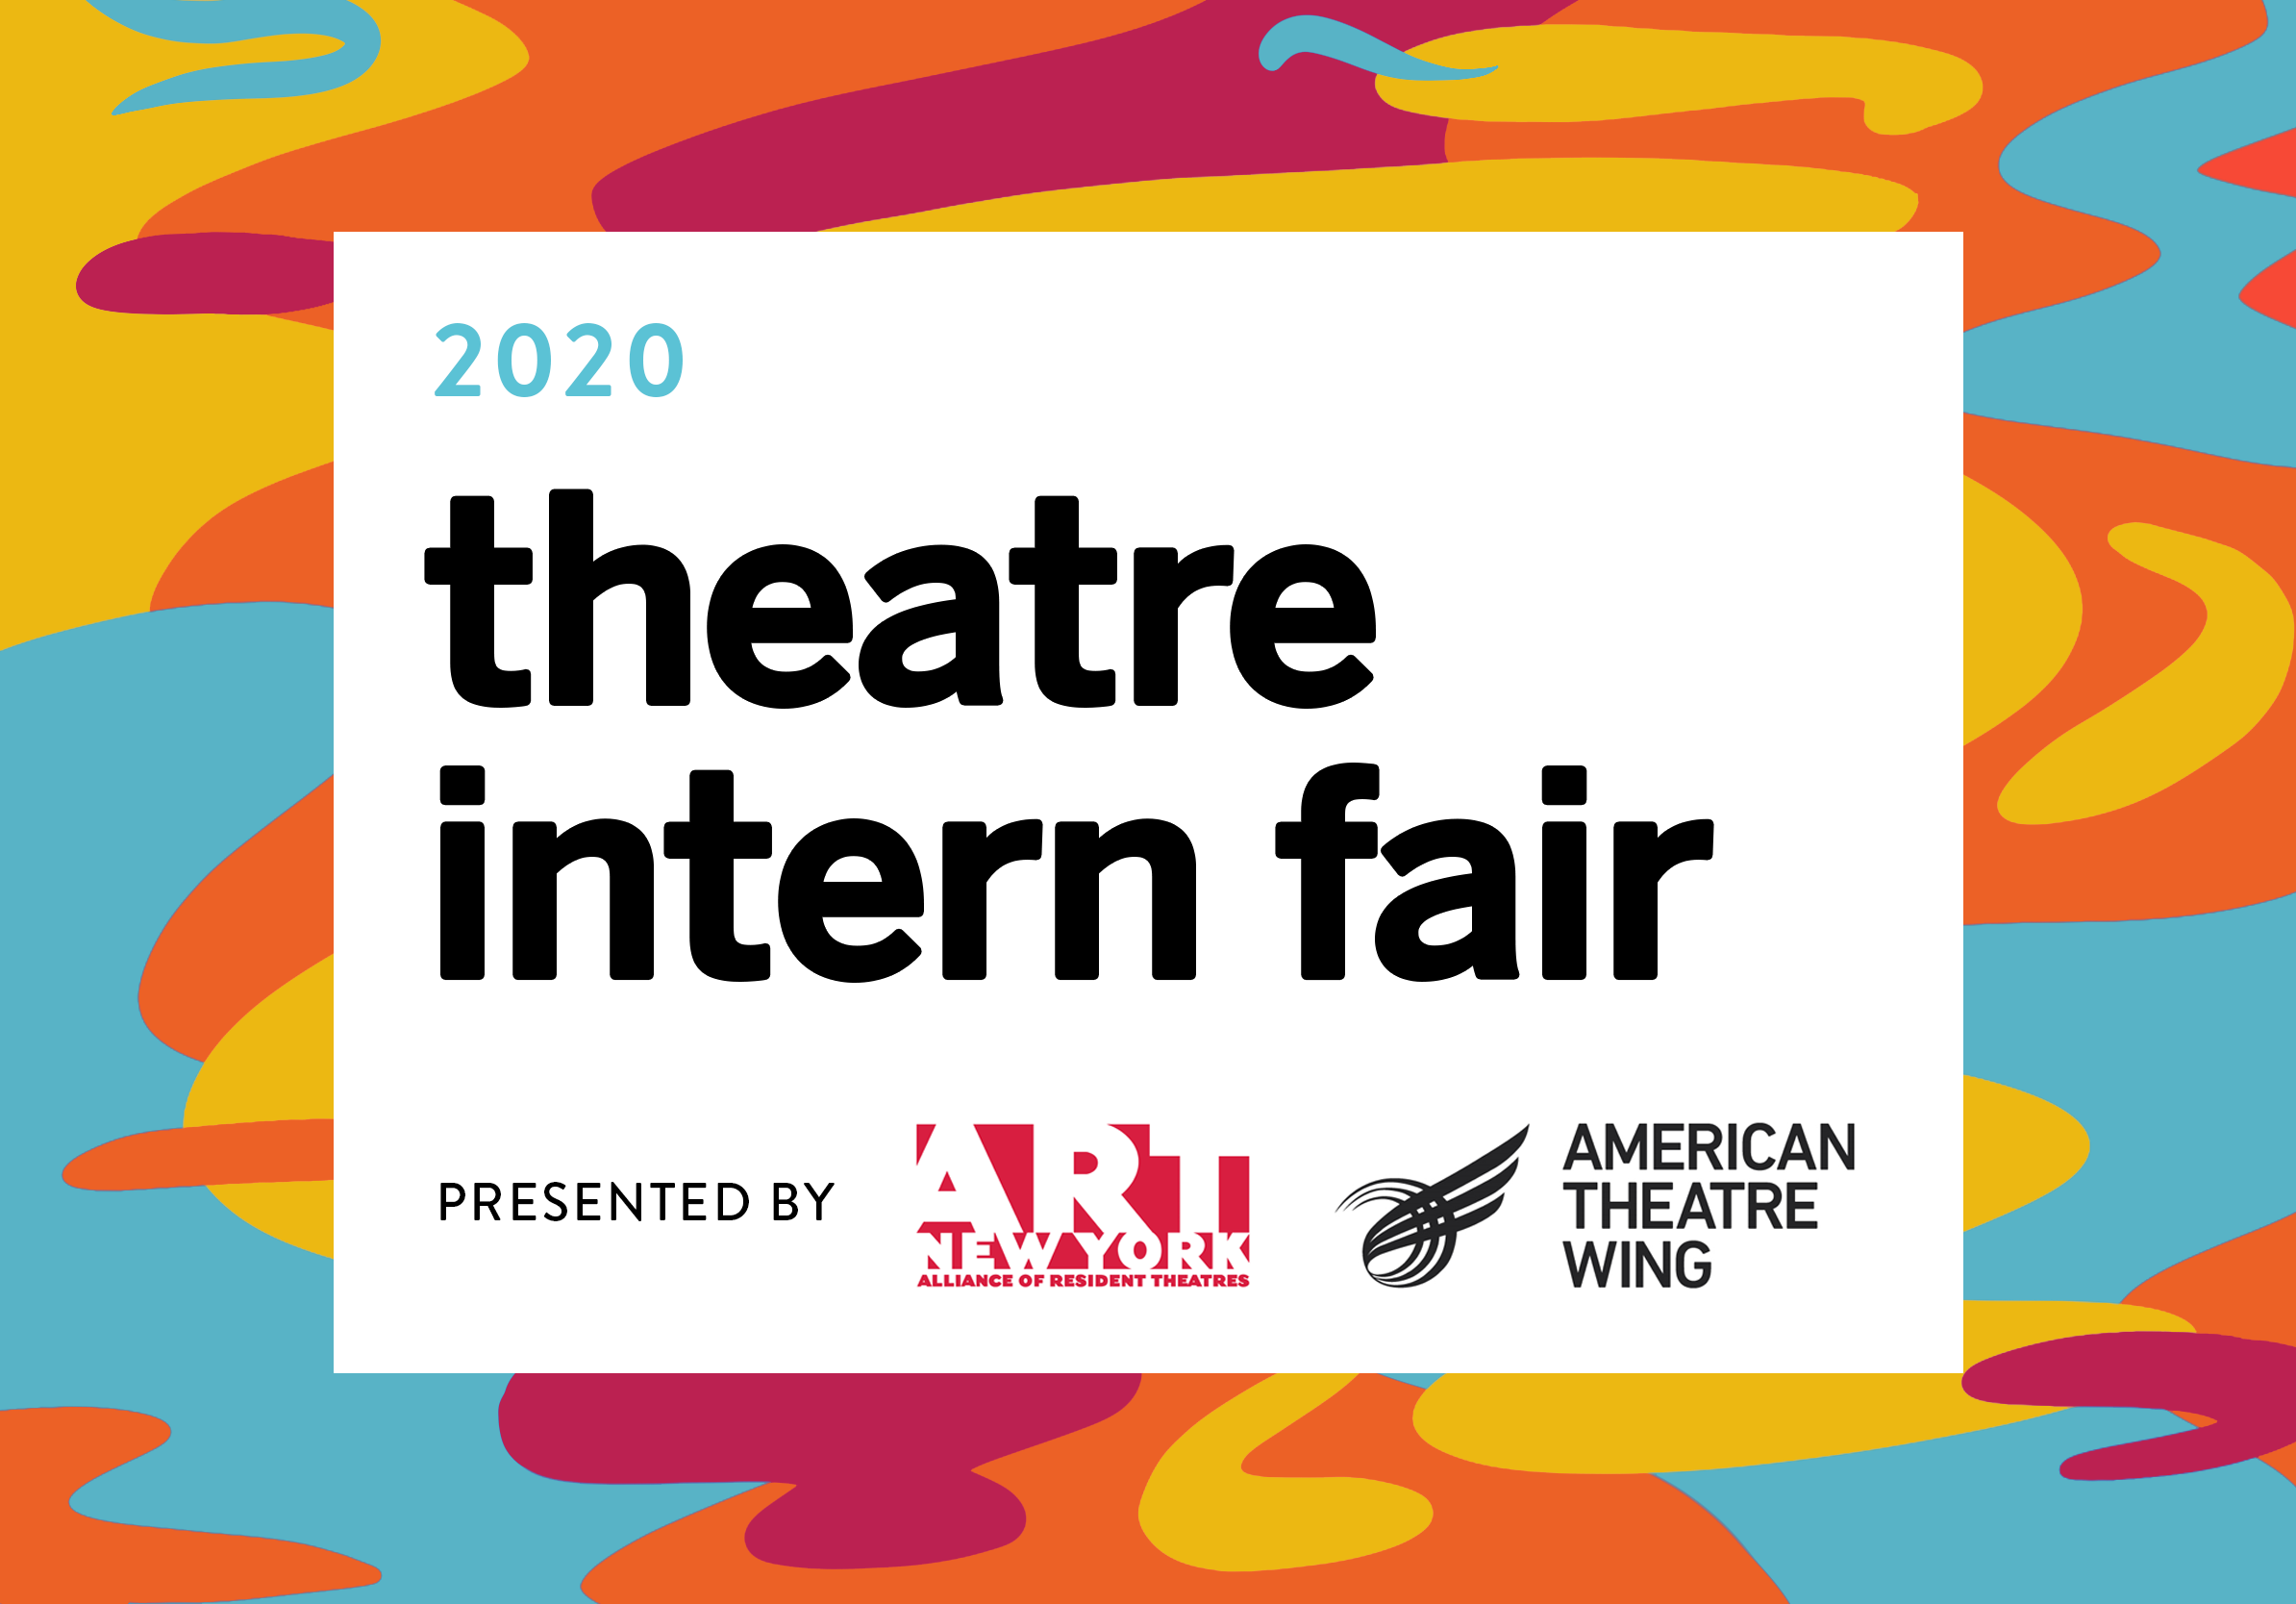 A colorful, vibrant graphic with orange, red, and yellow blobs. On top of the graphic is a box with information about the Intern Fair.